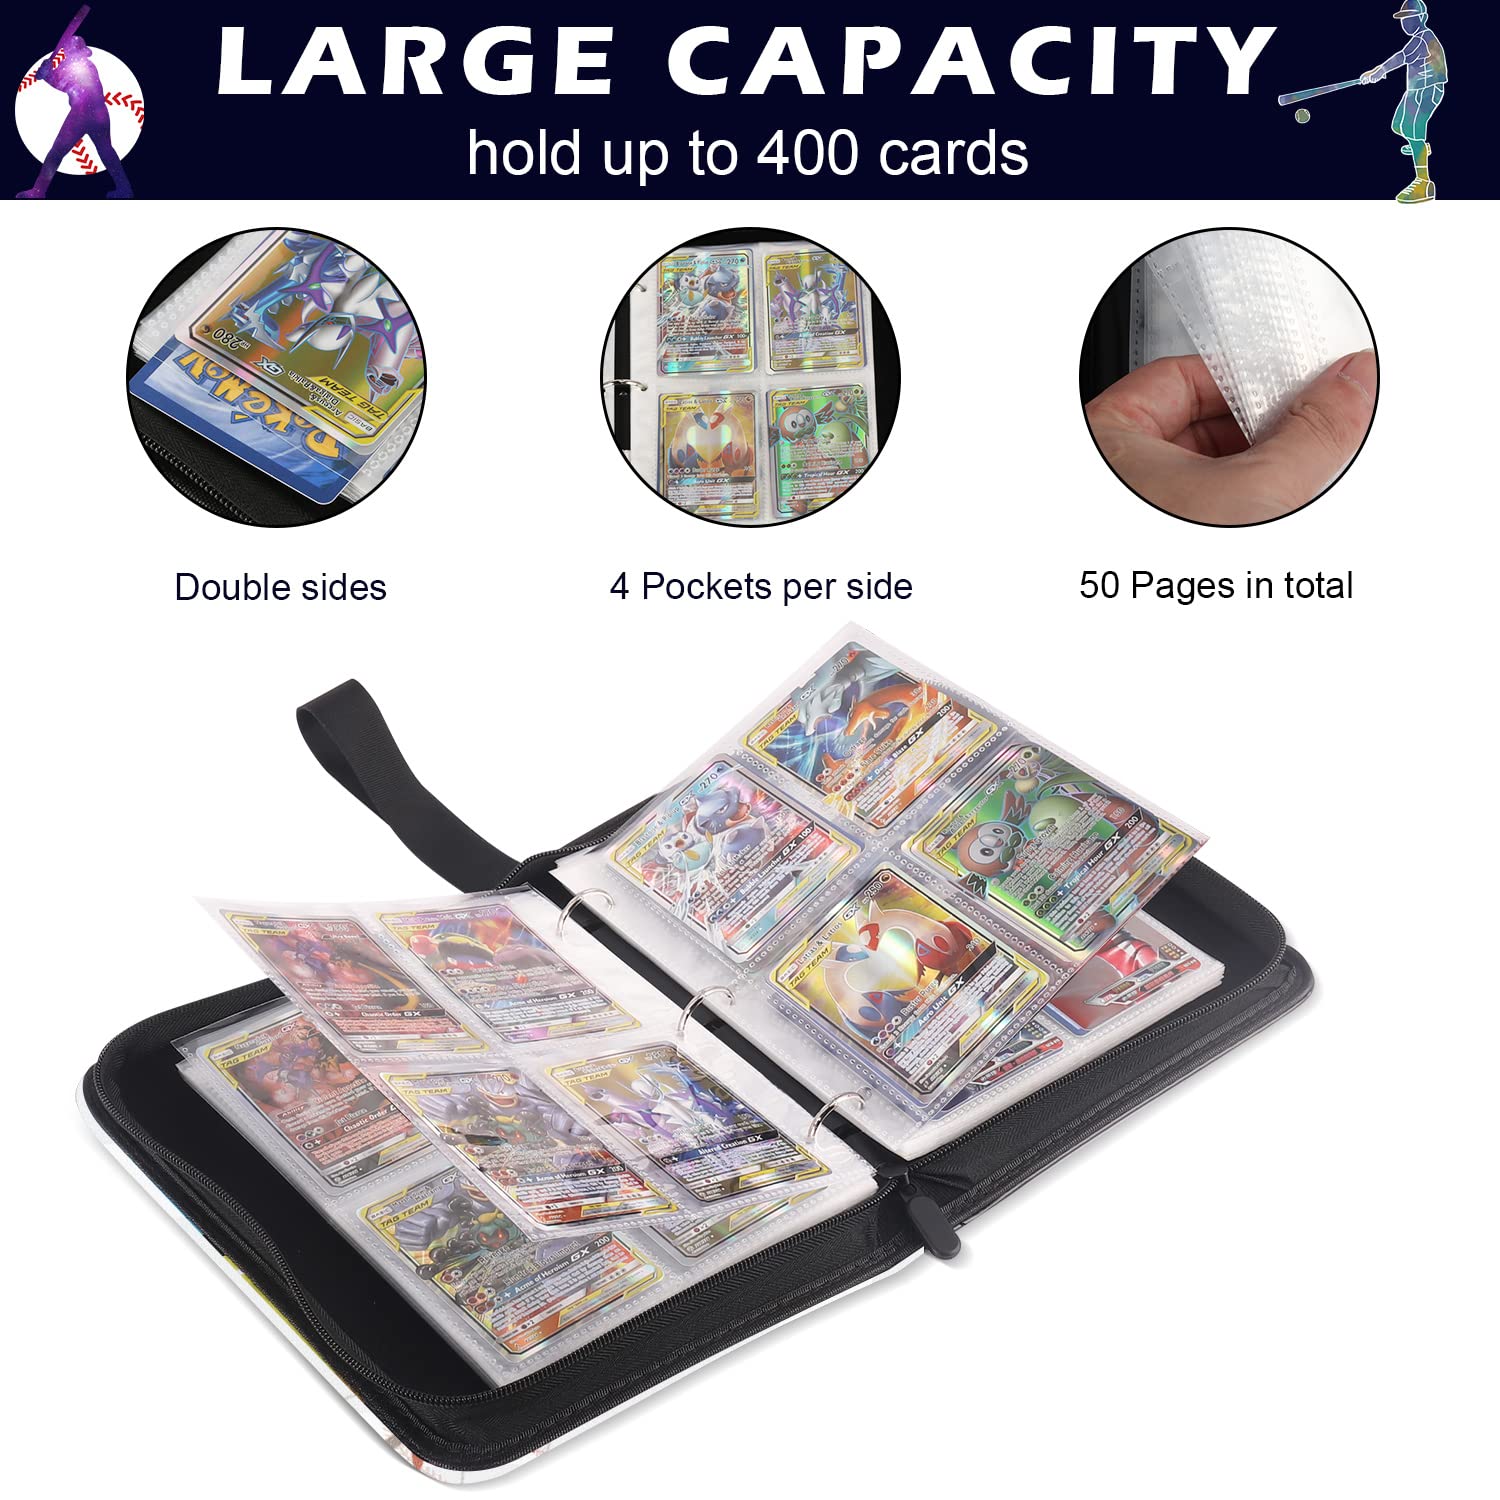 cEcOKESO Card Binder 4 Pocket, Fits 400 Cards with 50 Removable Sleevesves,Trading Card Binder with Sleeves, Baseball Card Binder, Sports